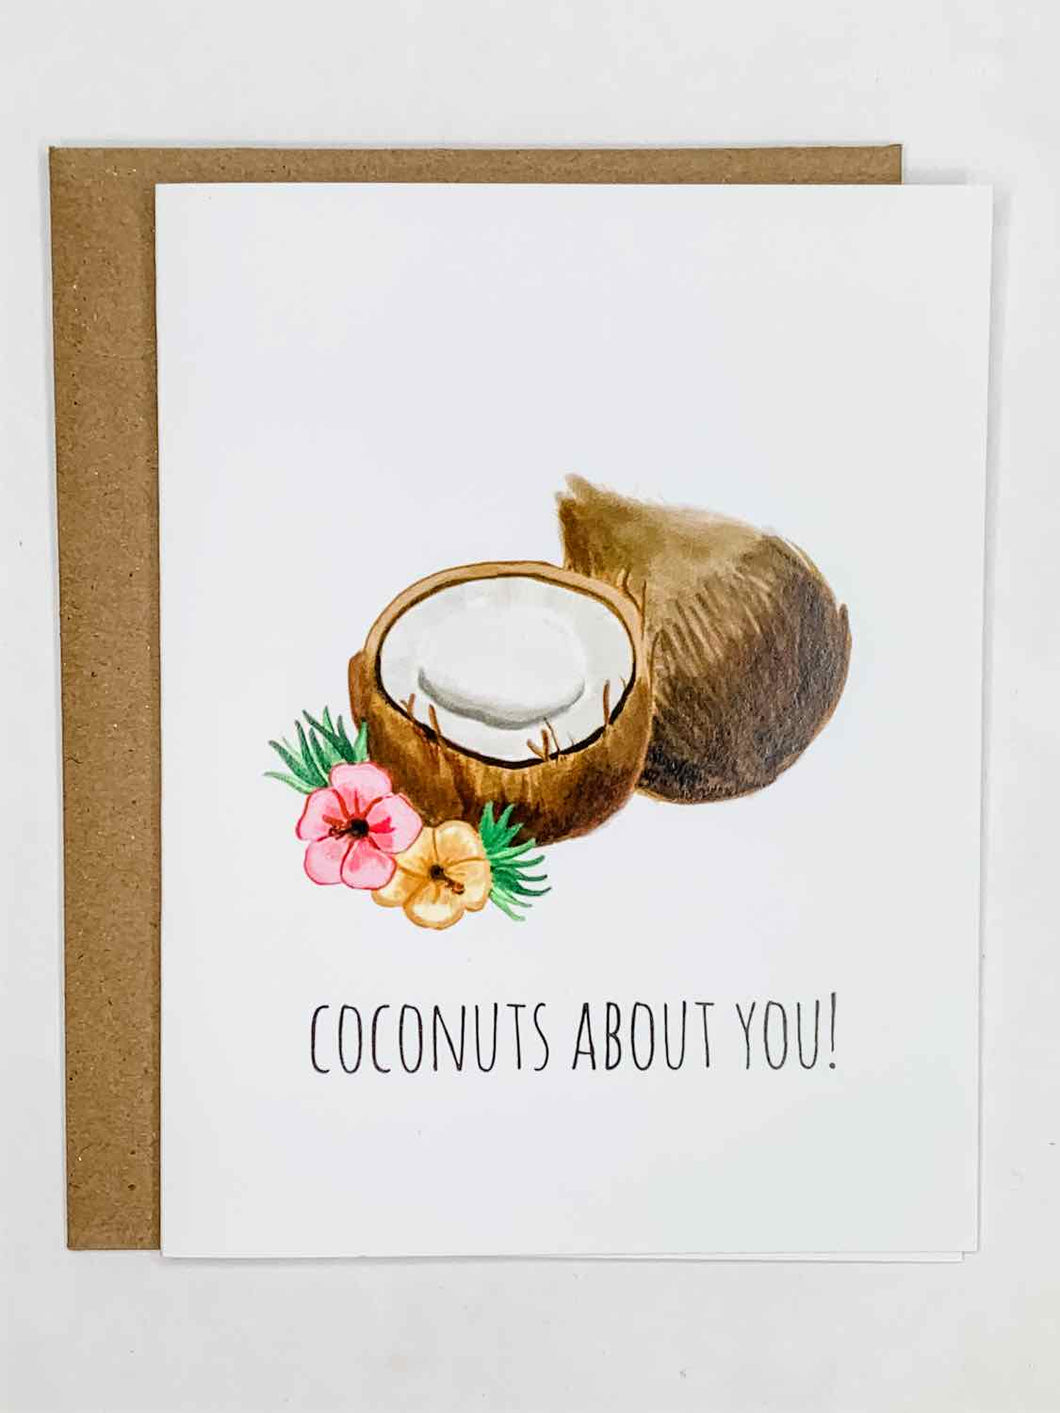 Coconuts About You!